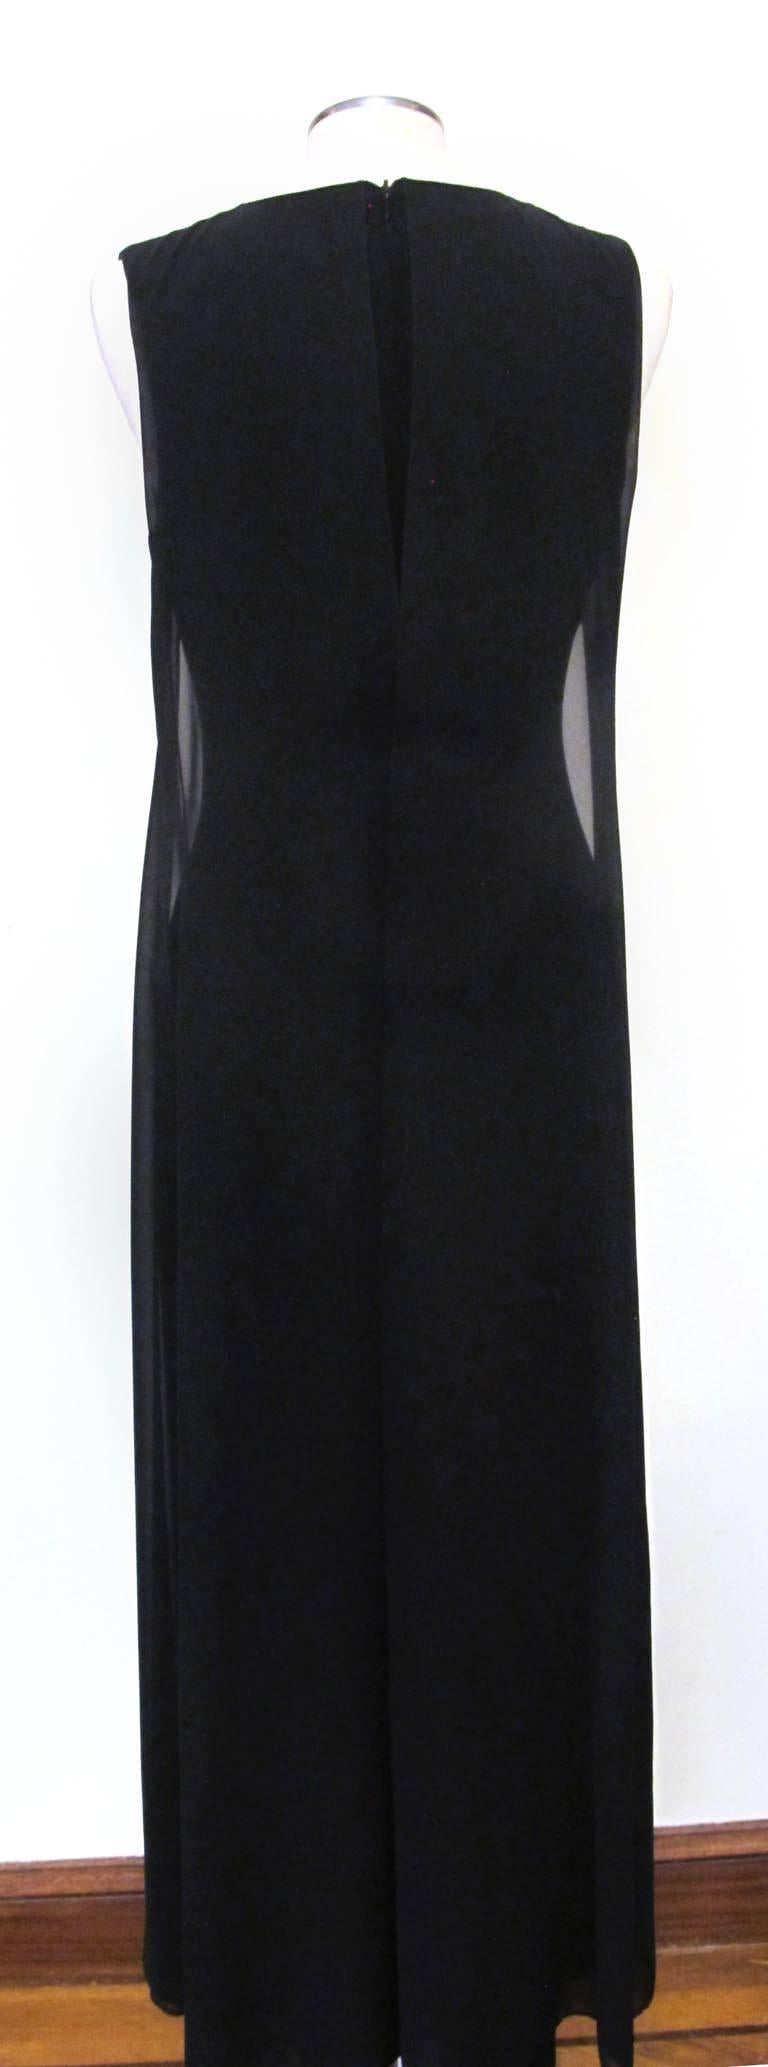 Women's Paco Rabanne 1990s Sleeveless Black Evening Gown with Sheer Panels For Sale